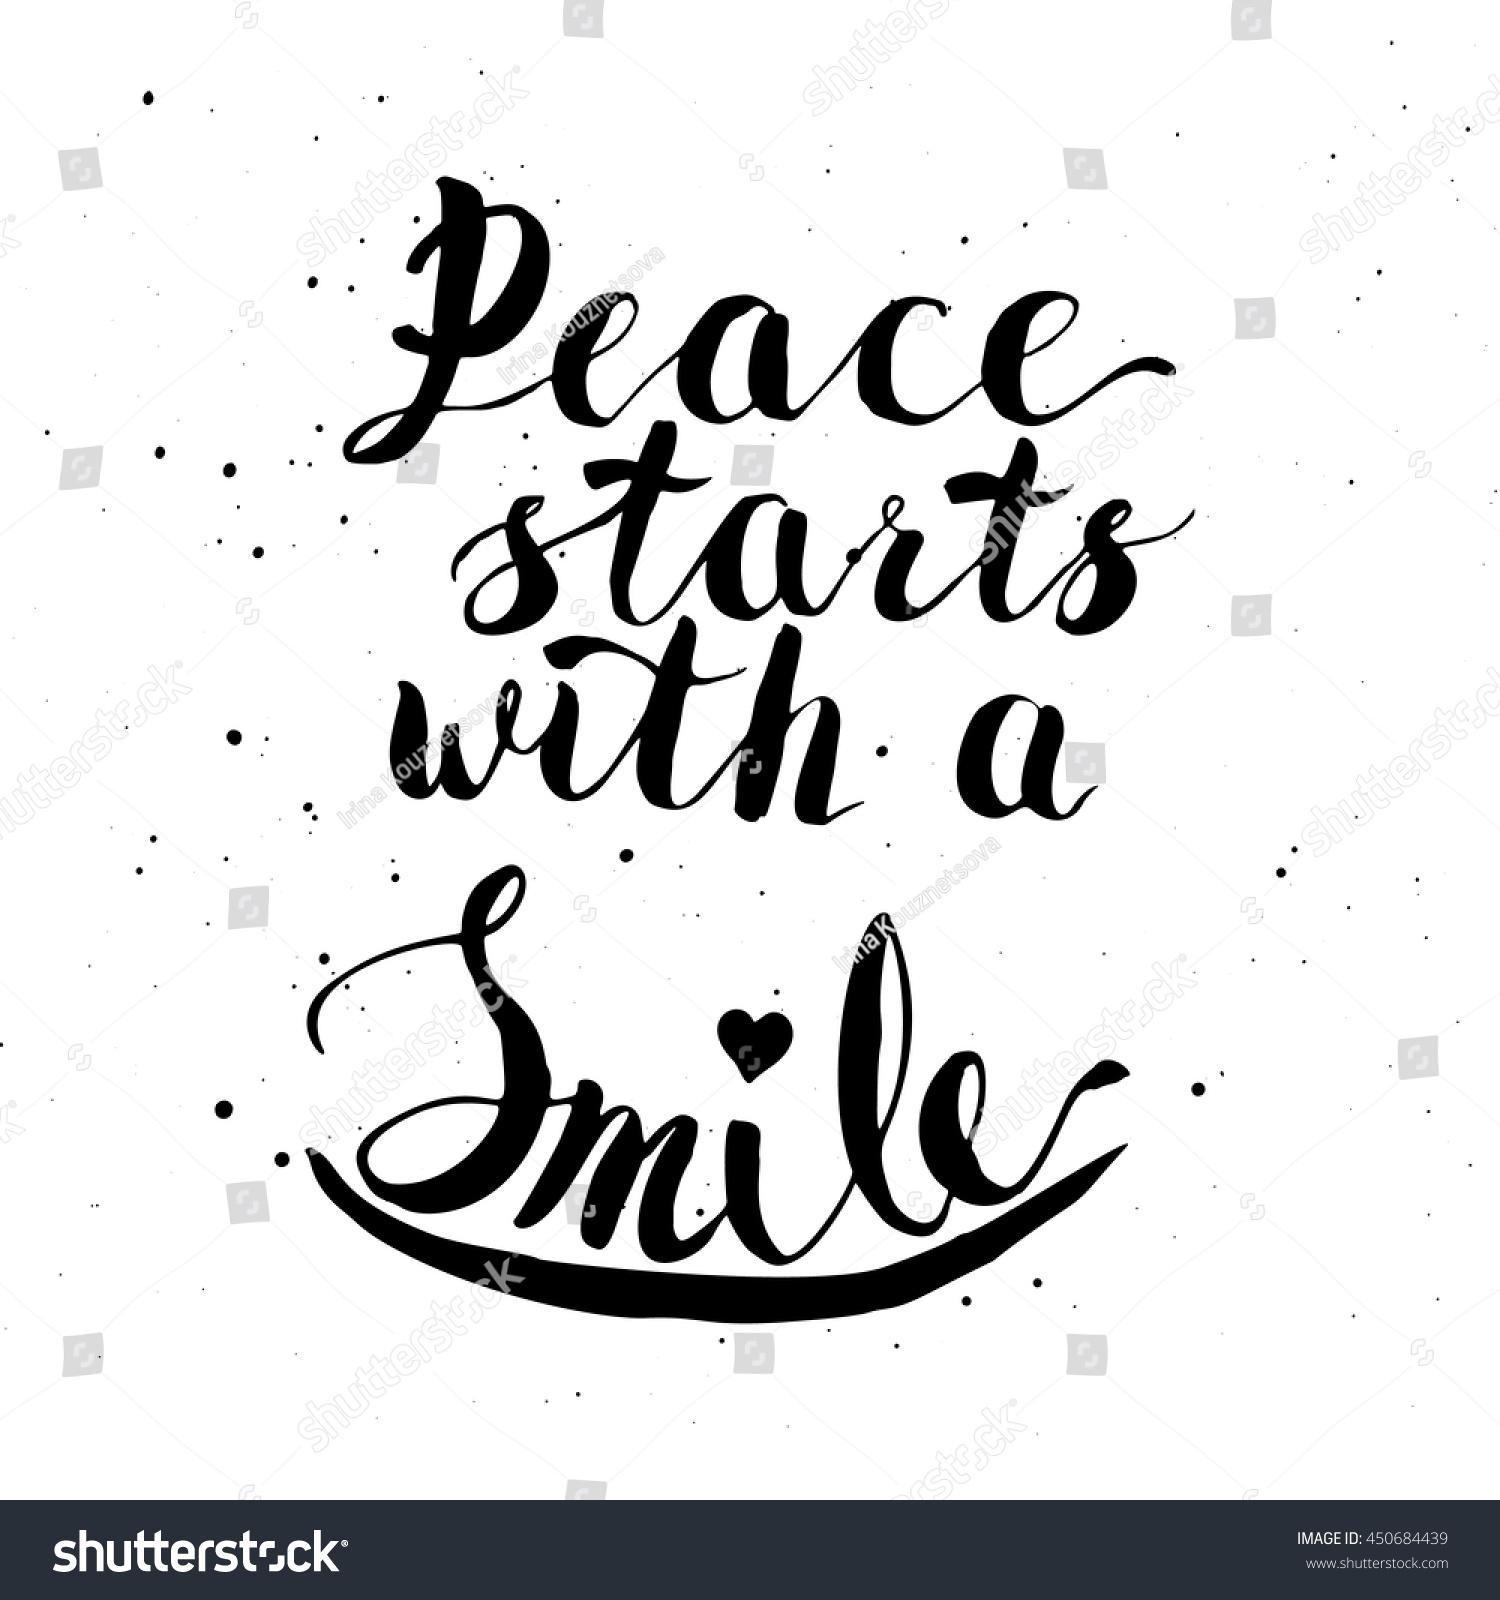 Download Peace Starts Smile Mother Teresas Quote Stock Vector 450684439 - Shutterstock